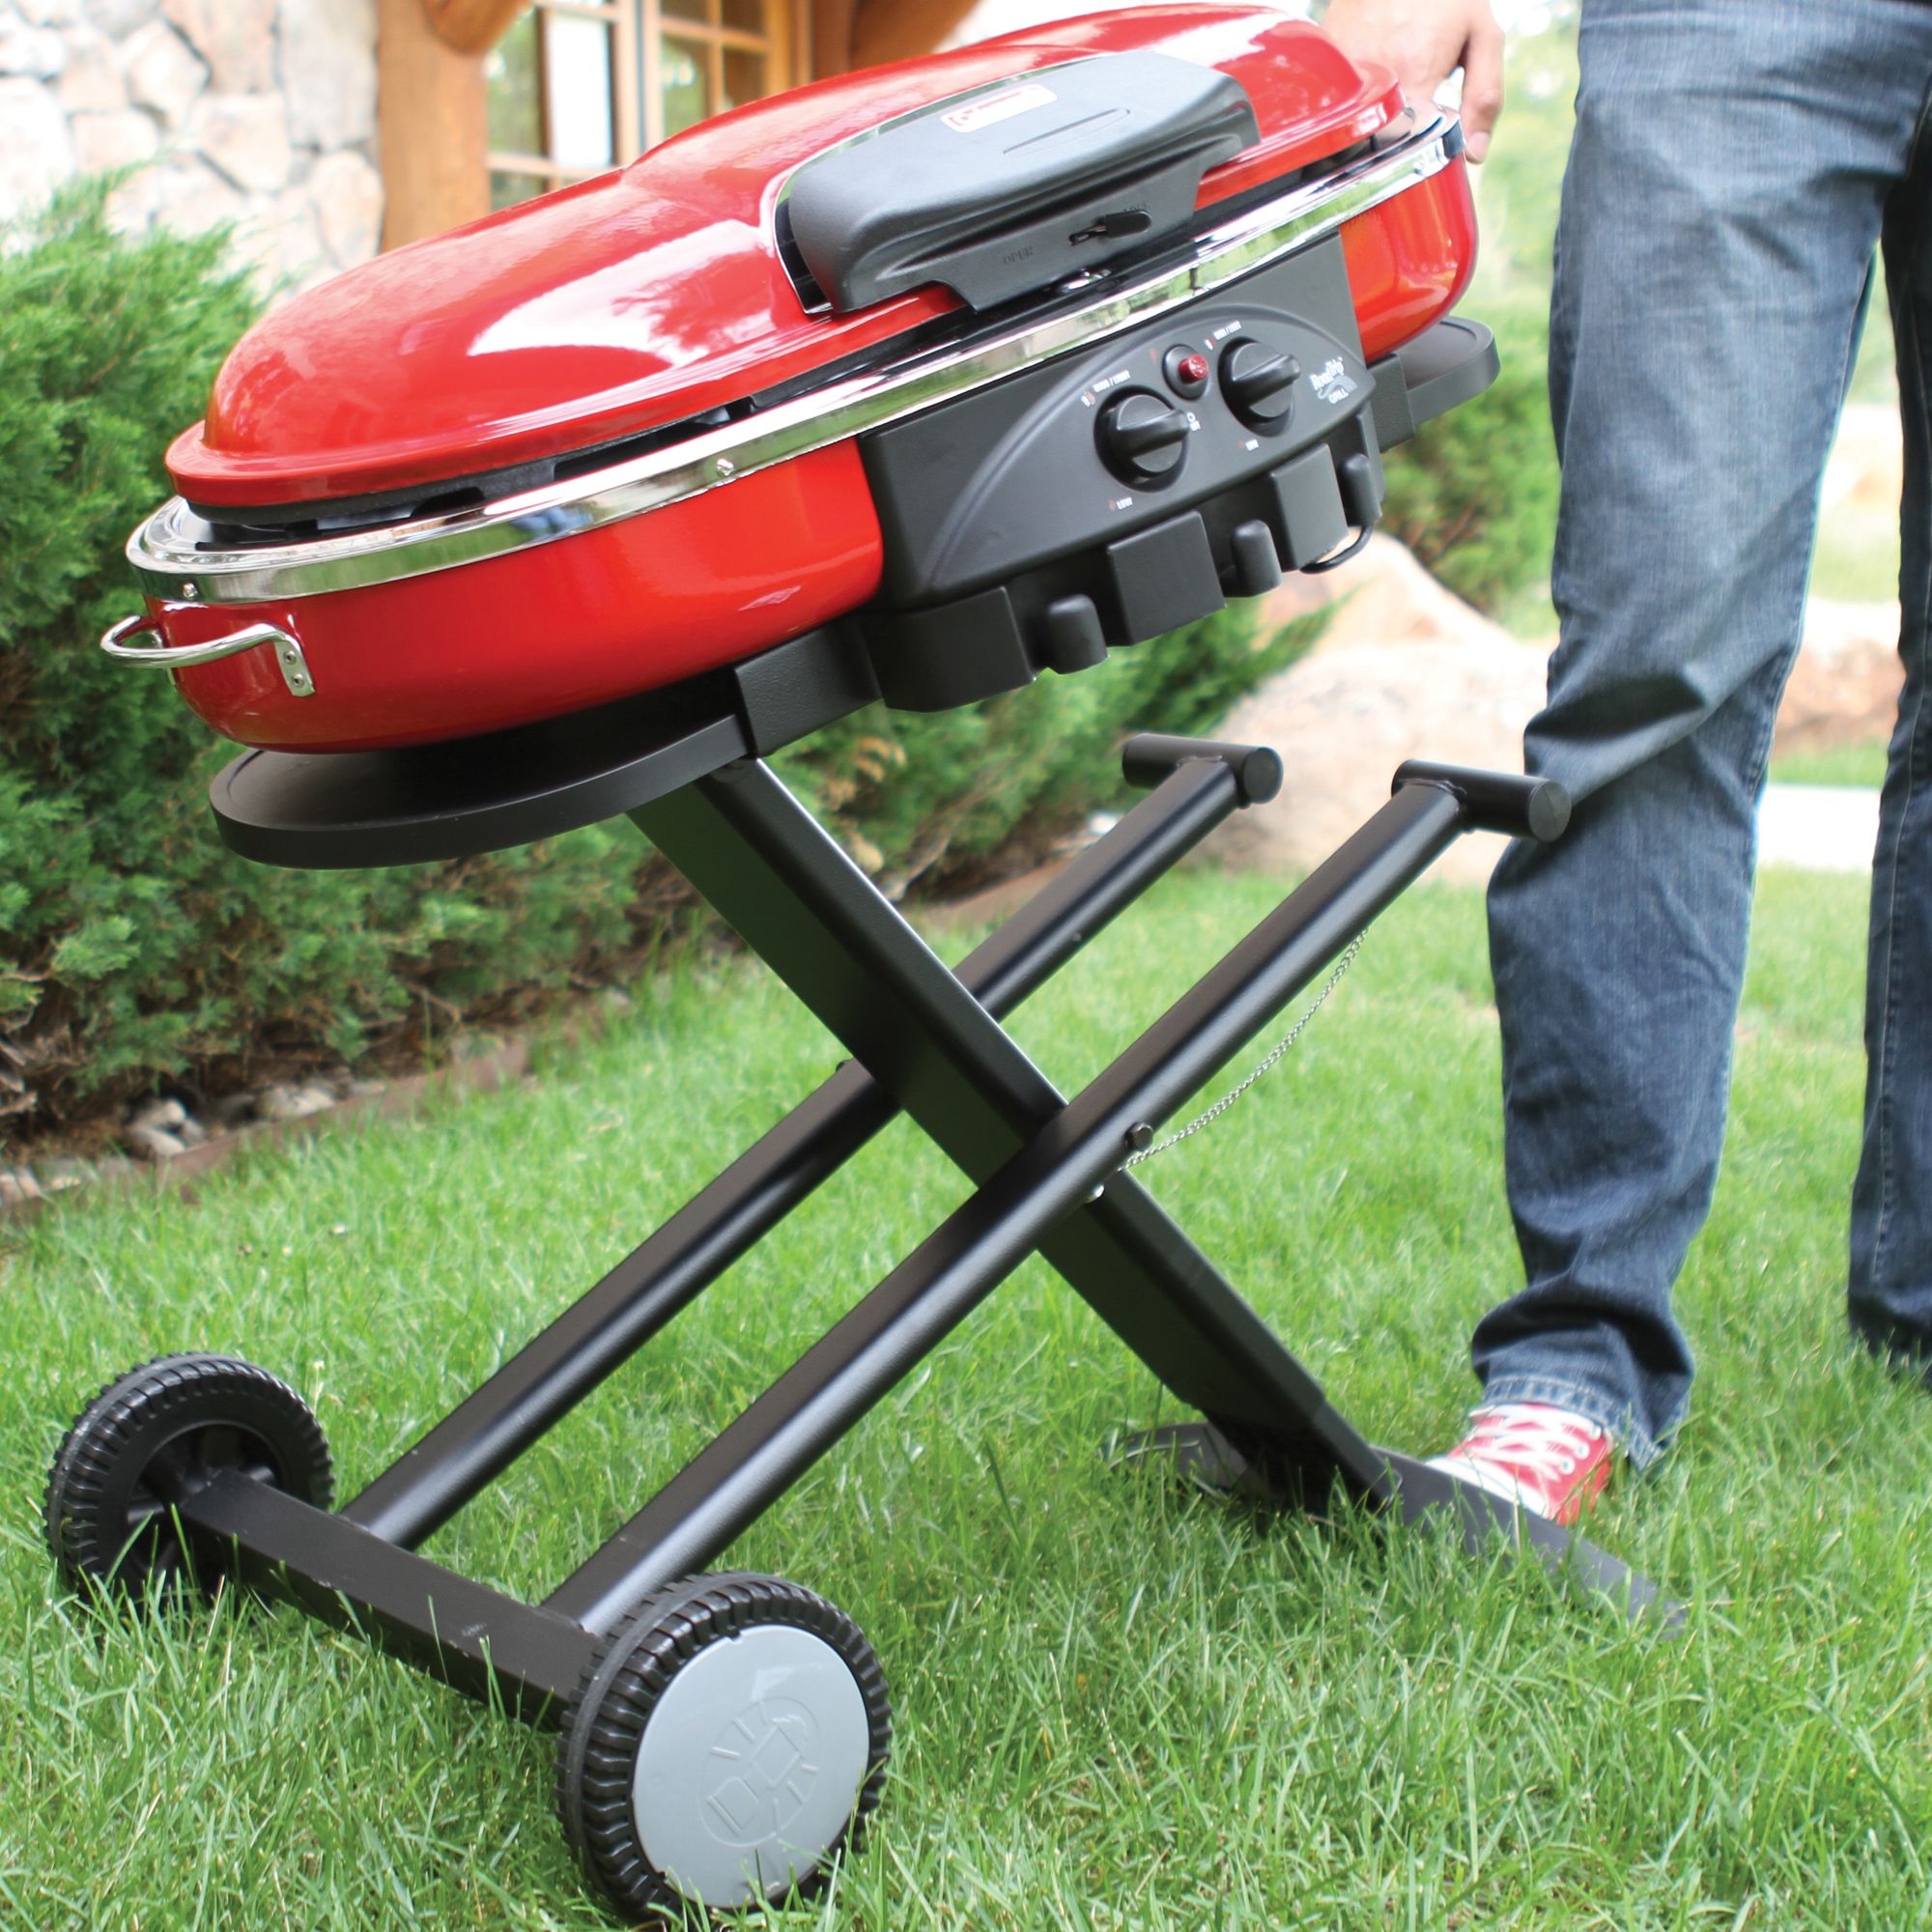 Best portable grill